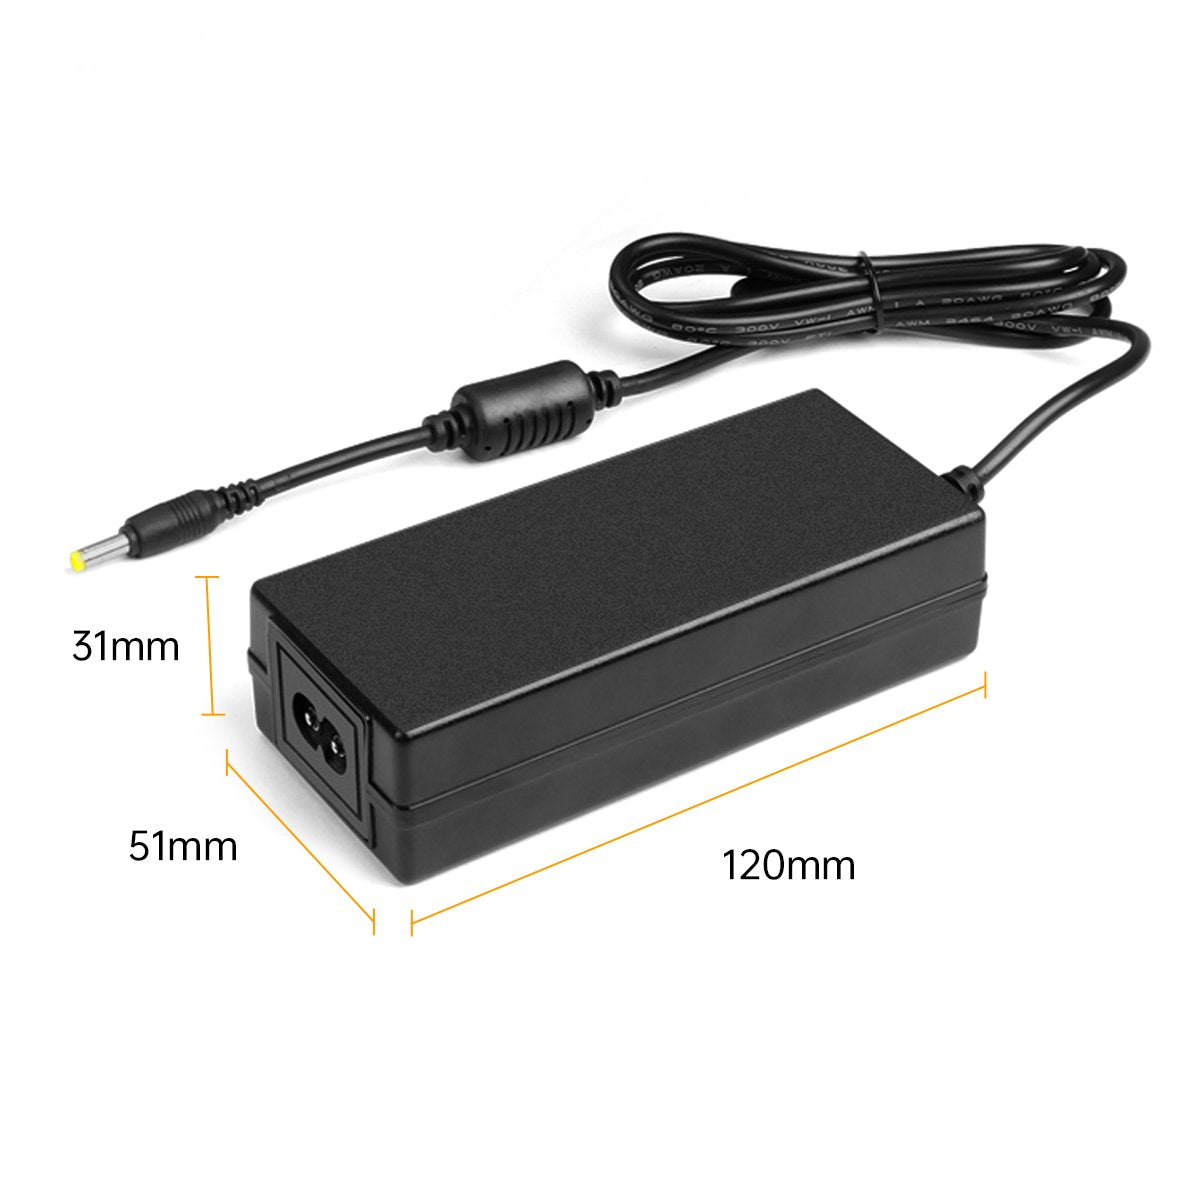 Power Supply Adapter for Robot Arm DC Plug 12V 5A